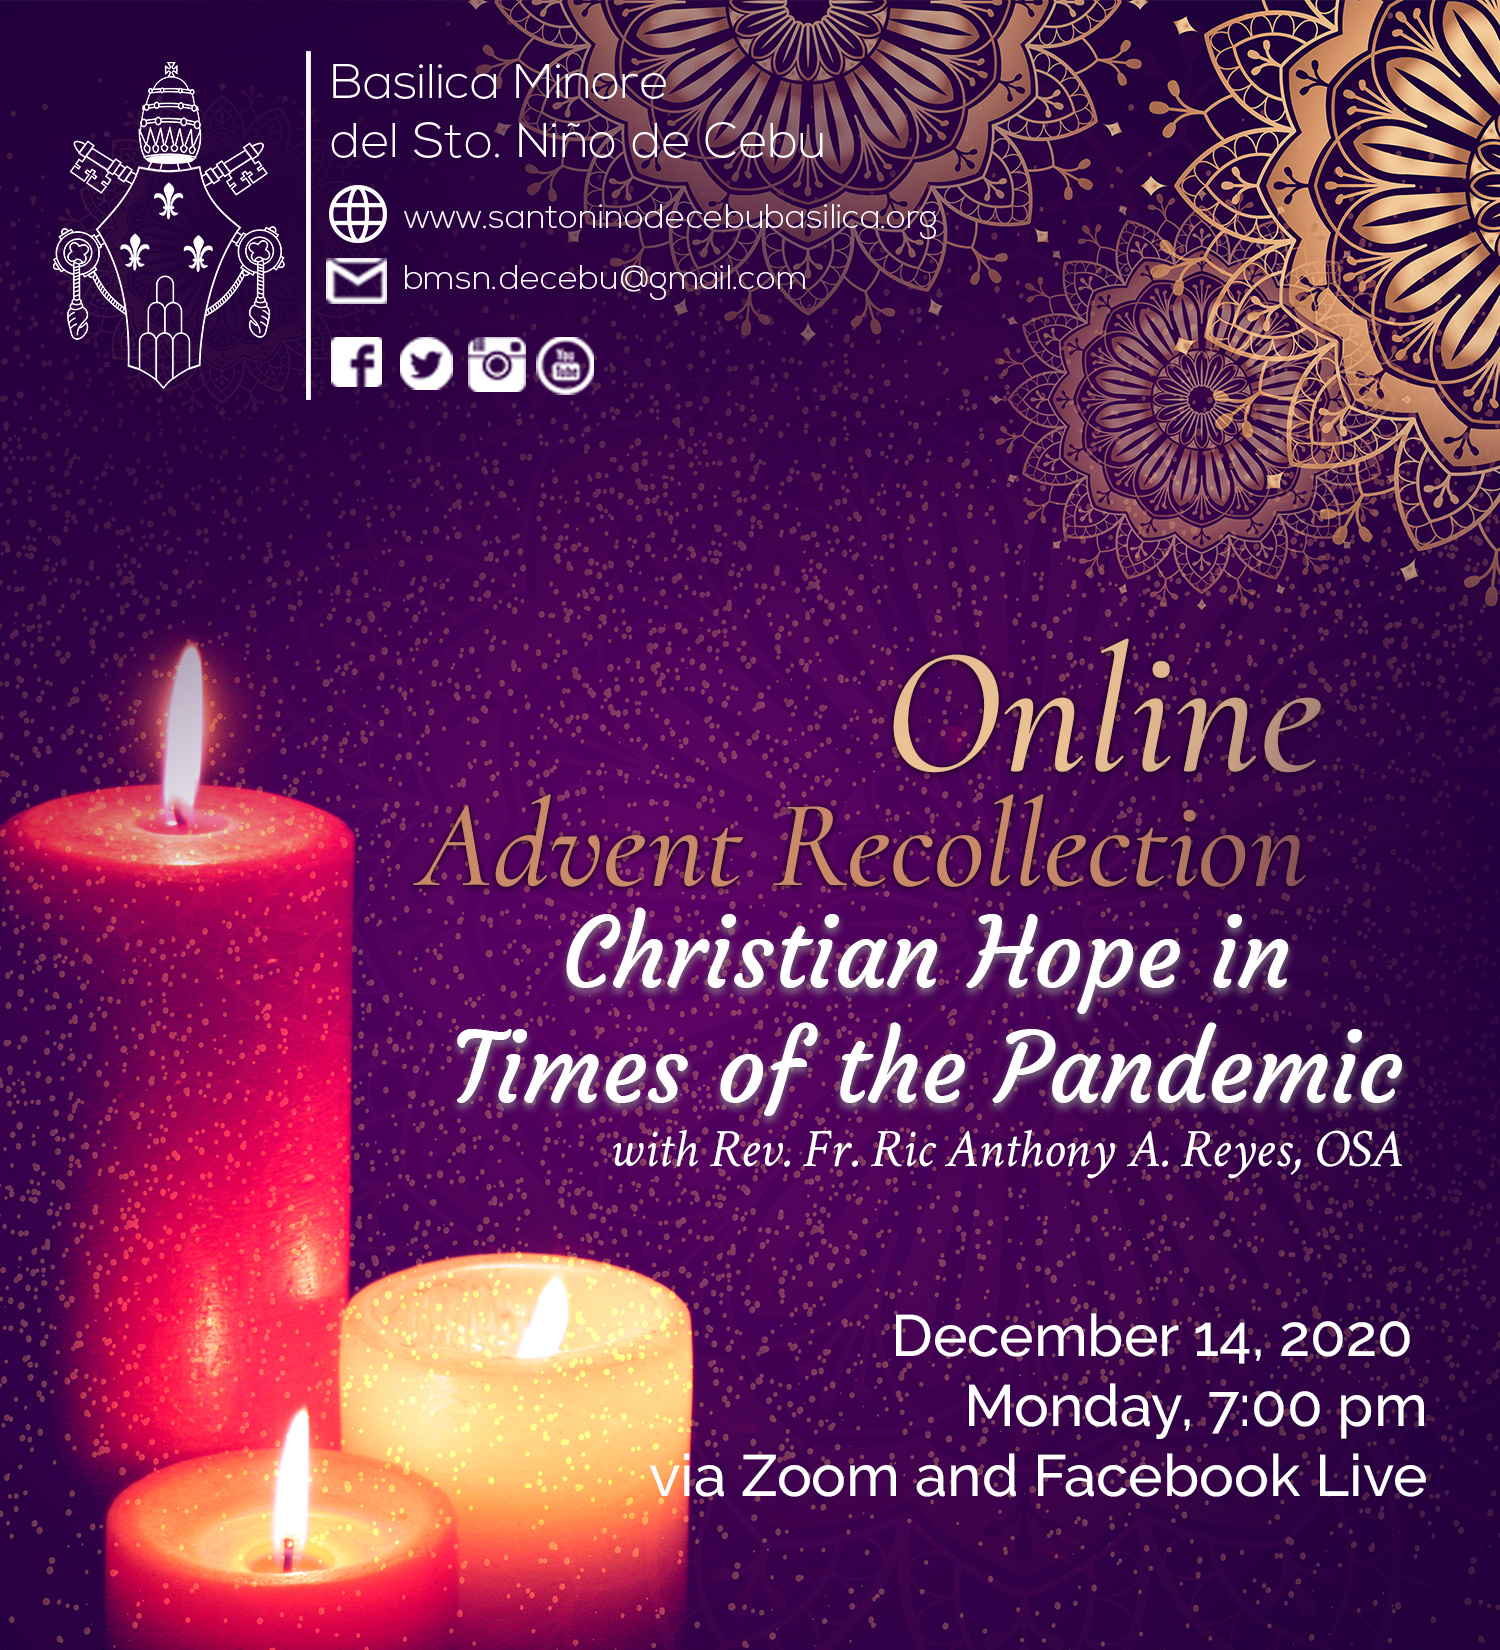 Advent recollection